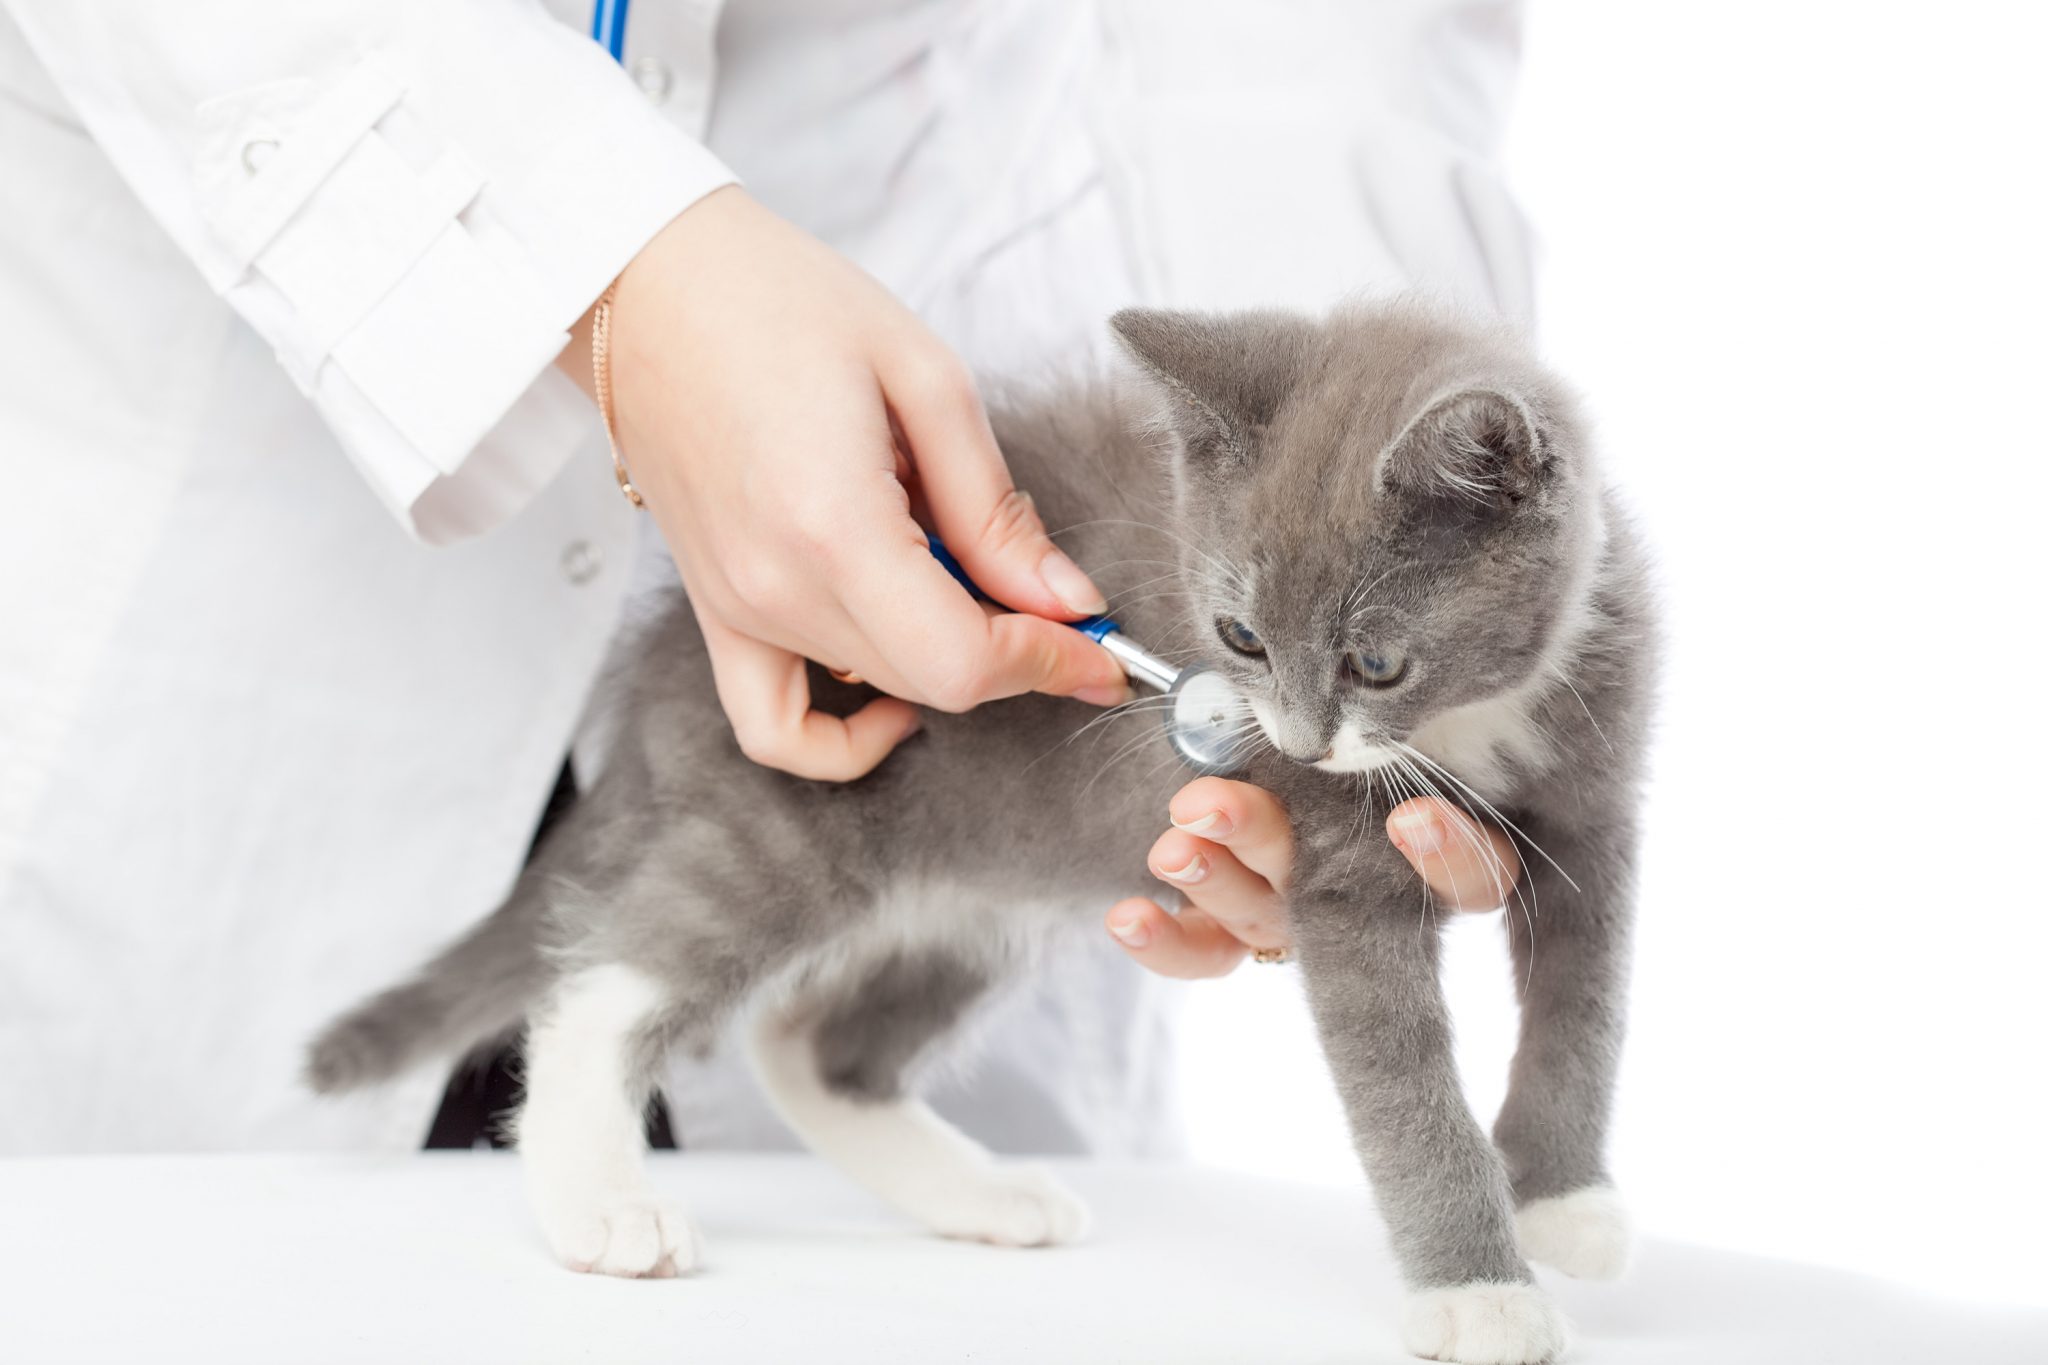 Kitten being examined by a veterinarian 